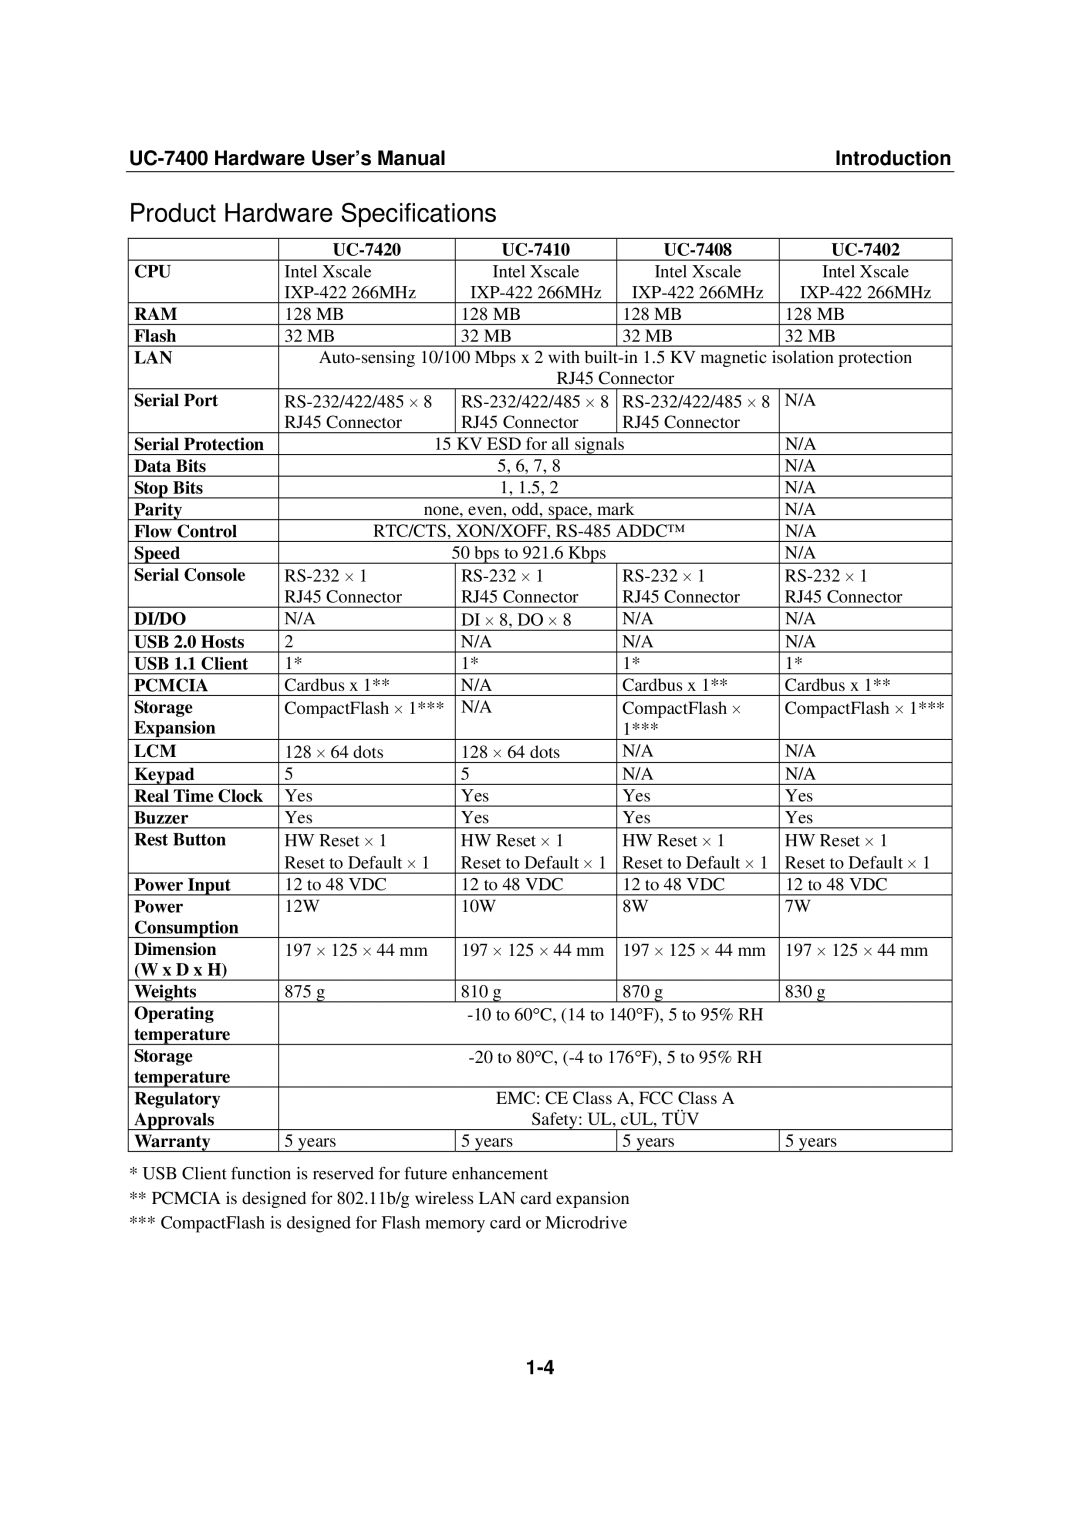 Moxa Technologies UC-7400 user manual Product Hardware Specifications, Lan 